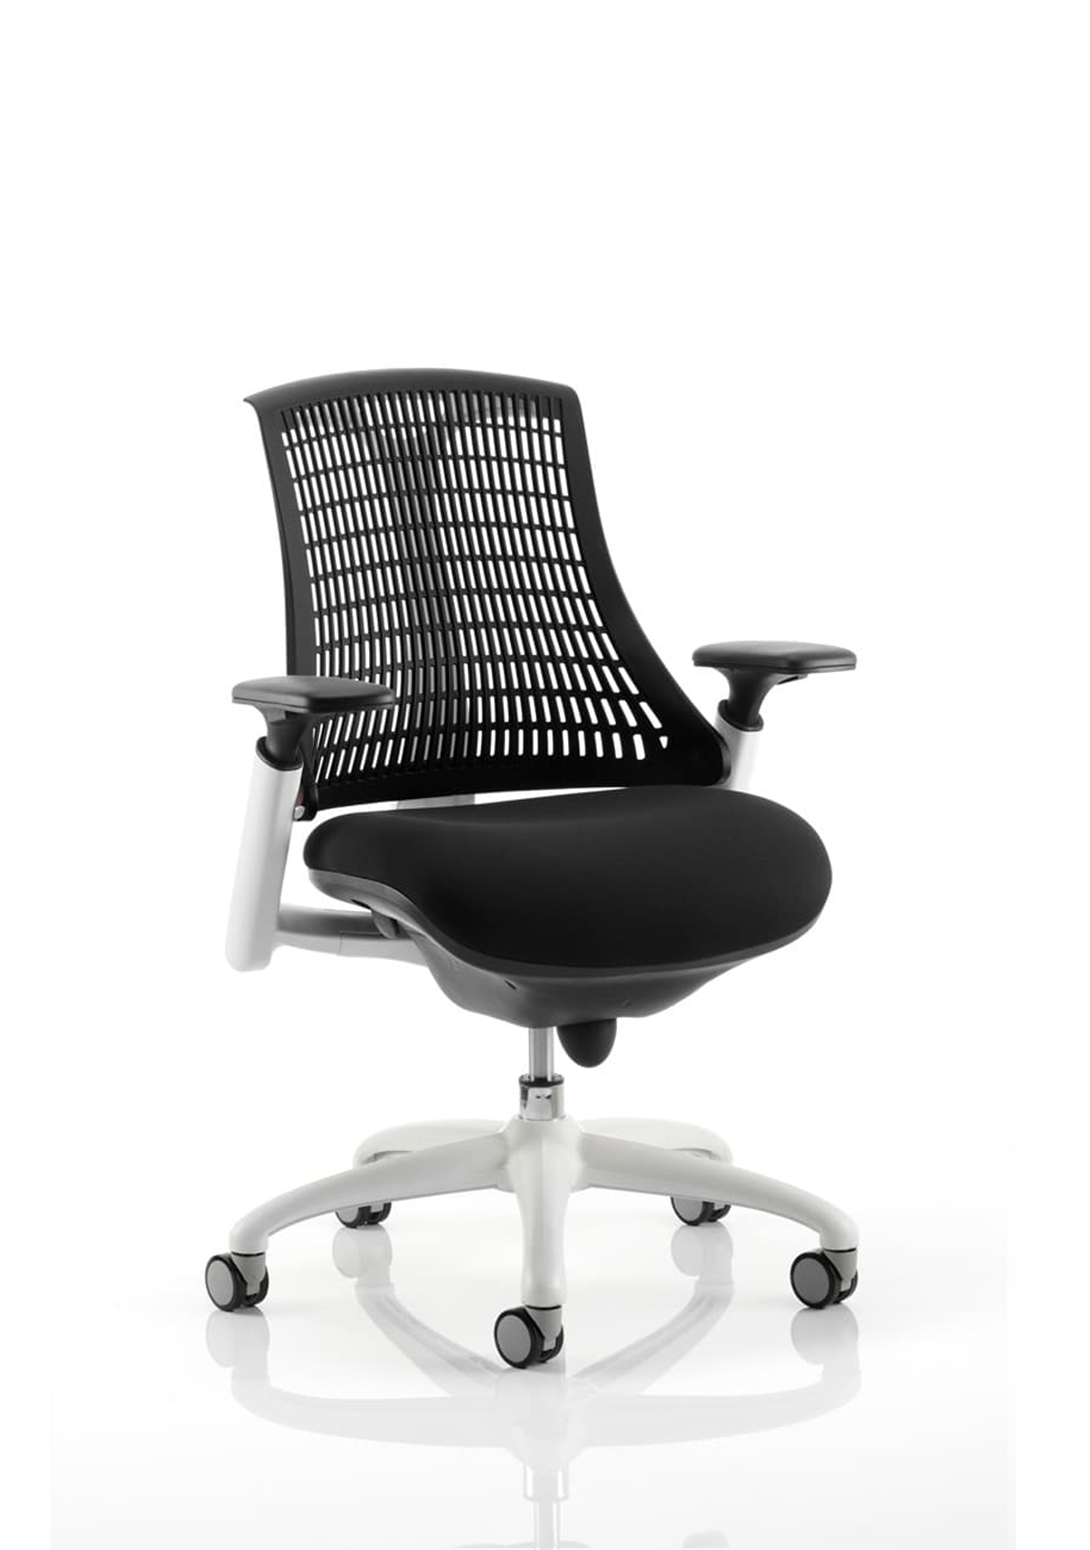 Flex with White Frame Home Office Chair | Home Office Furniture | Ergonomic Furniture | Office Chair | Swivel Chair | Home Office Furnishings | Ergonomic Office Chair